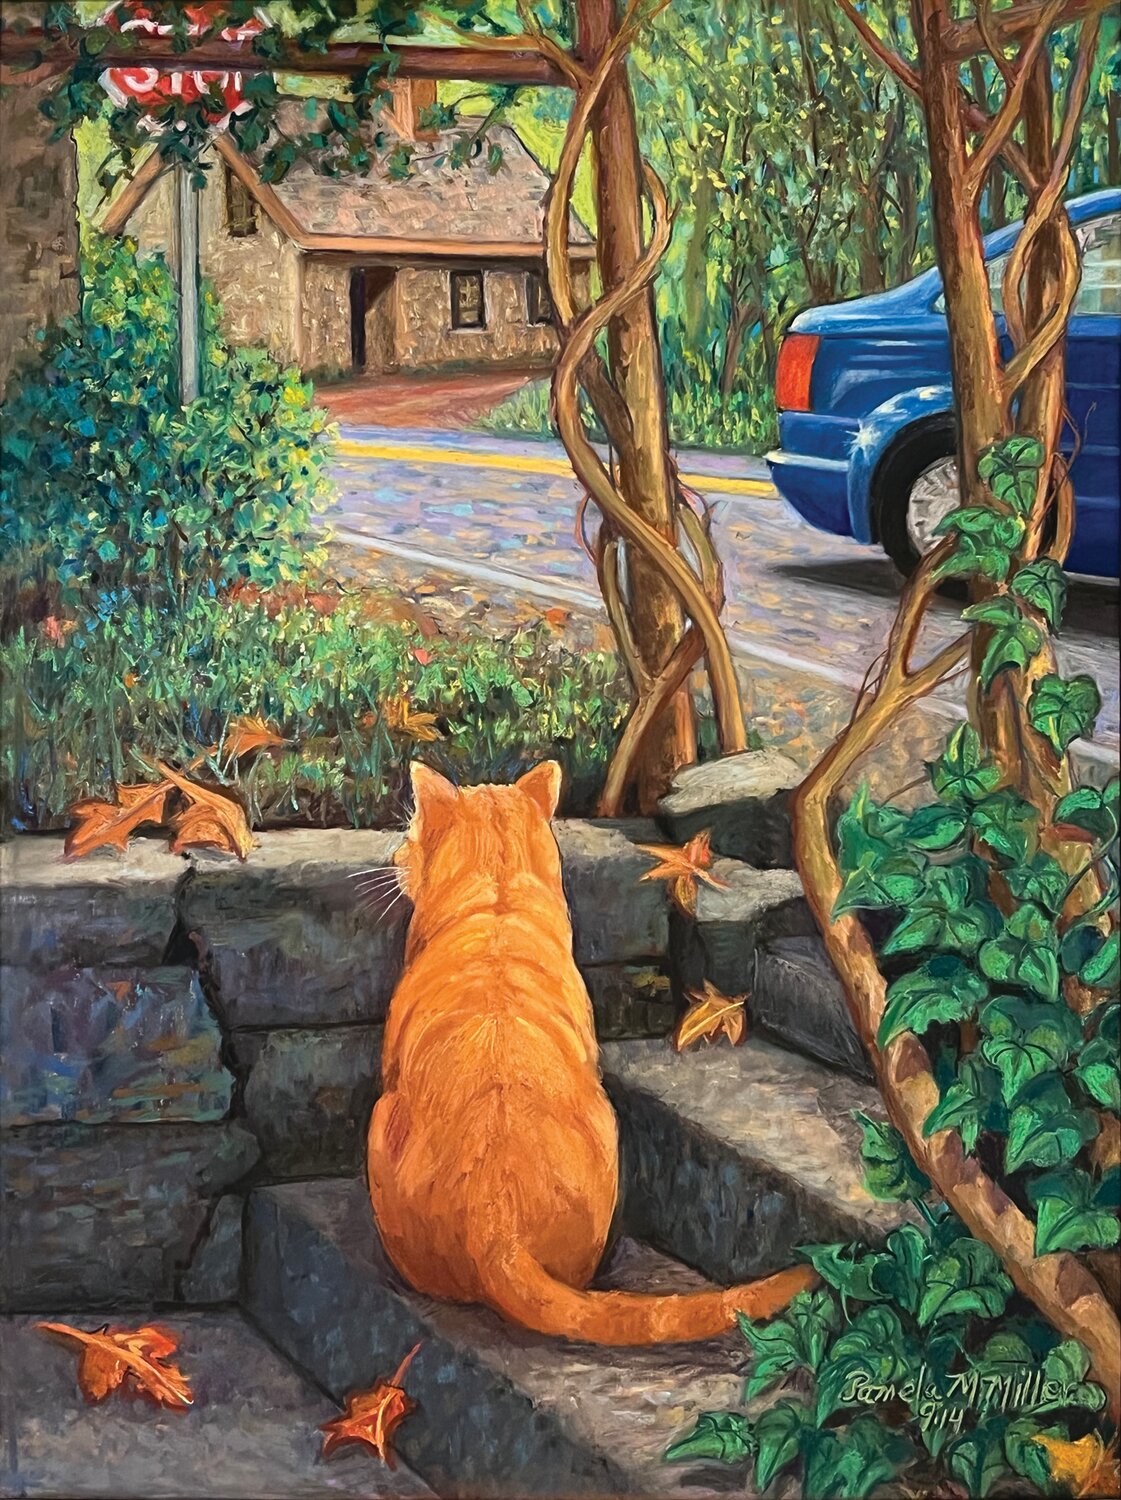 “The Phillips’ Mill Party Cat” by Pamela Miller was selected as the signature image for this year’s Juried Art Show at Phillips’ Mill.